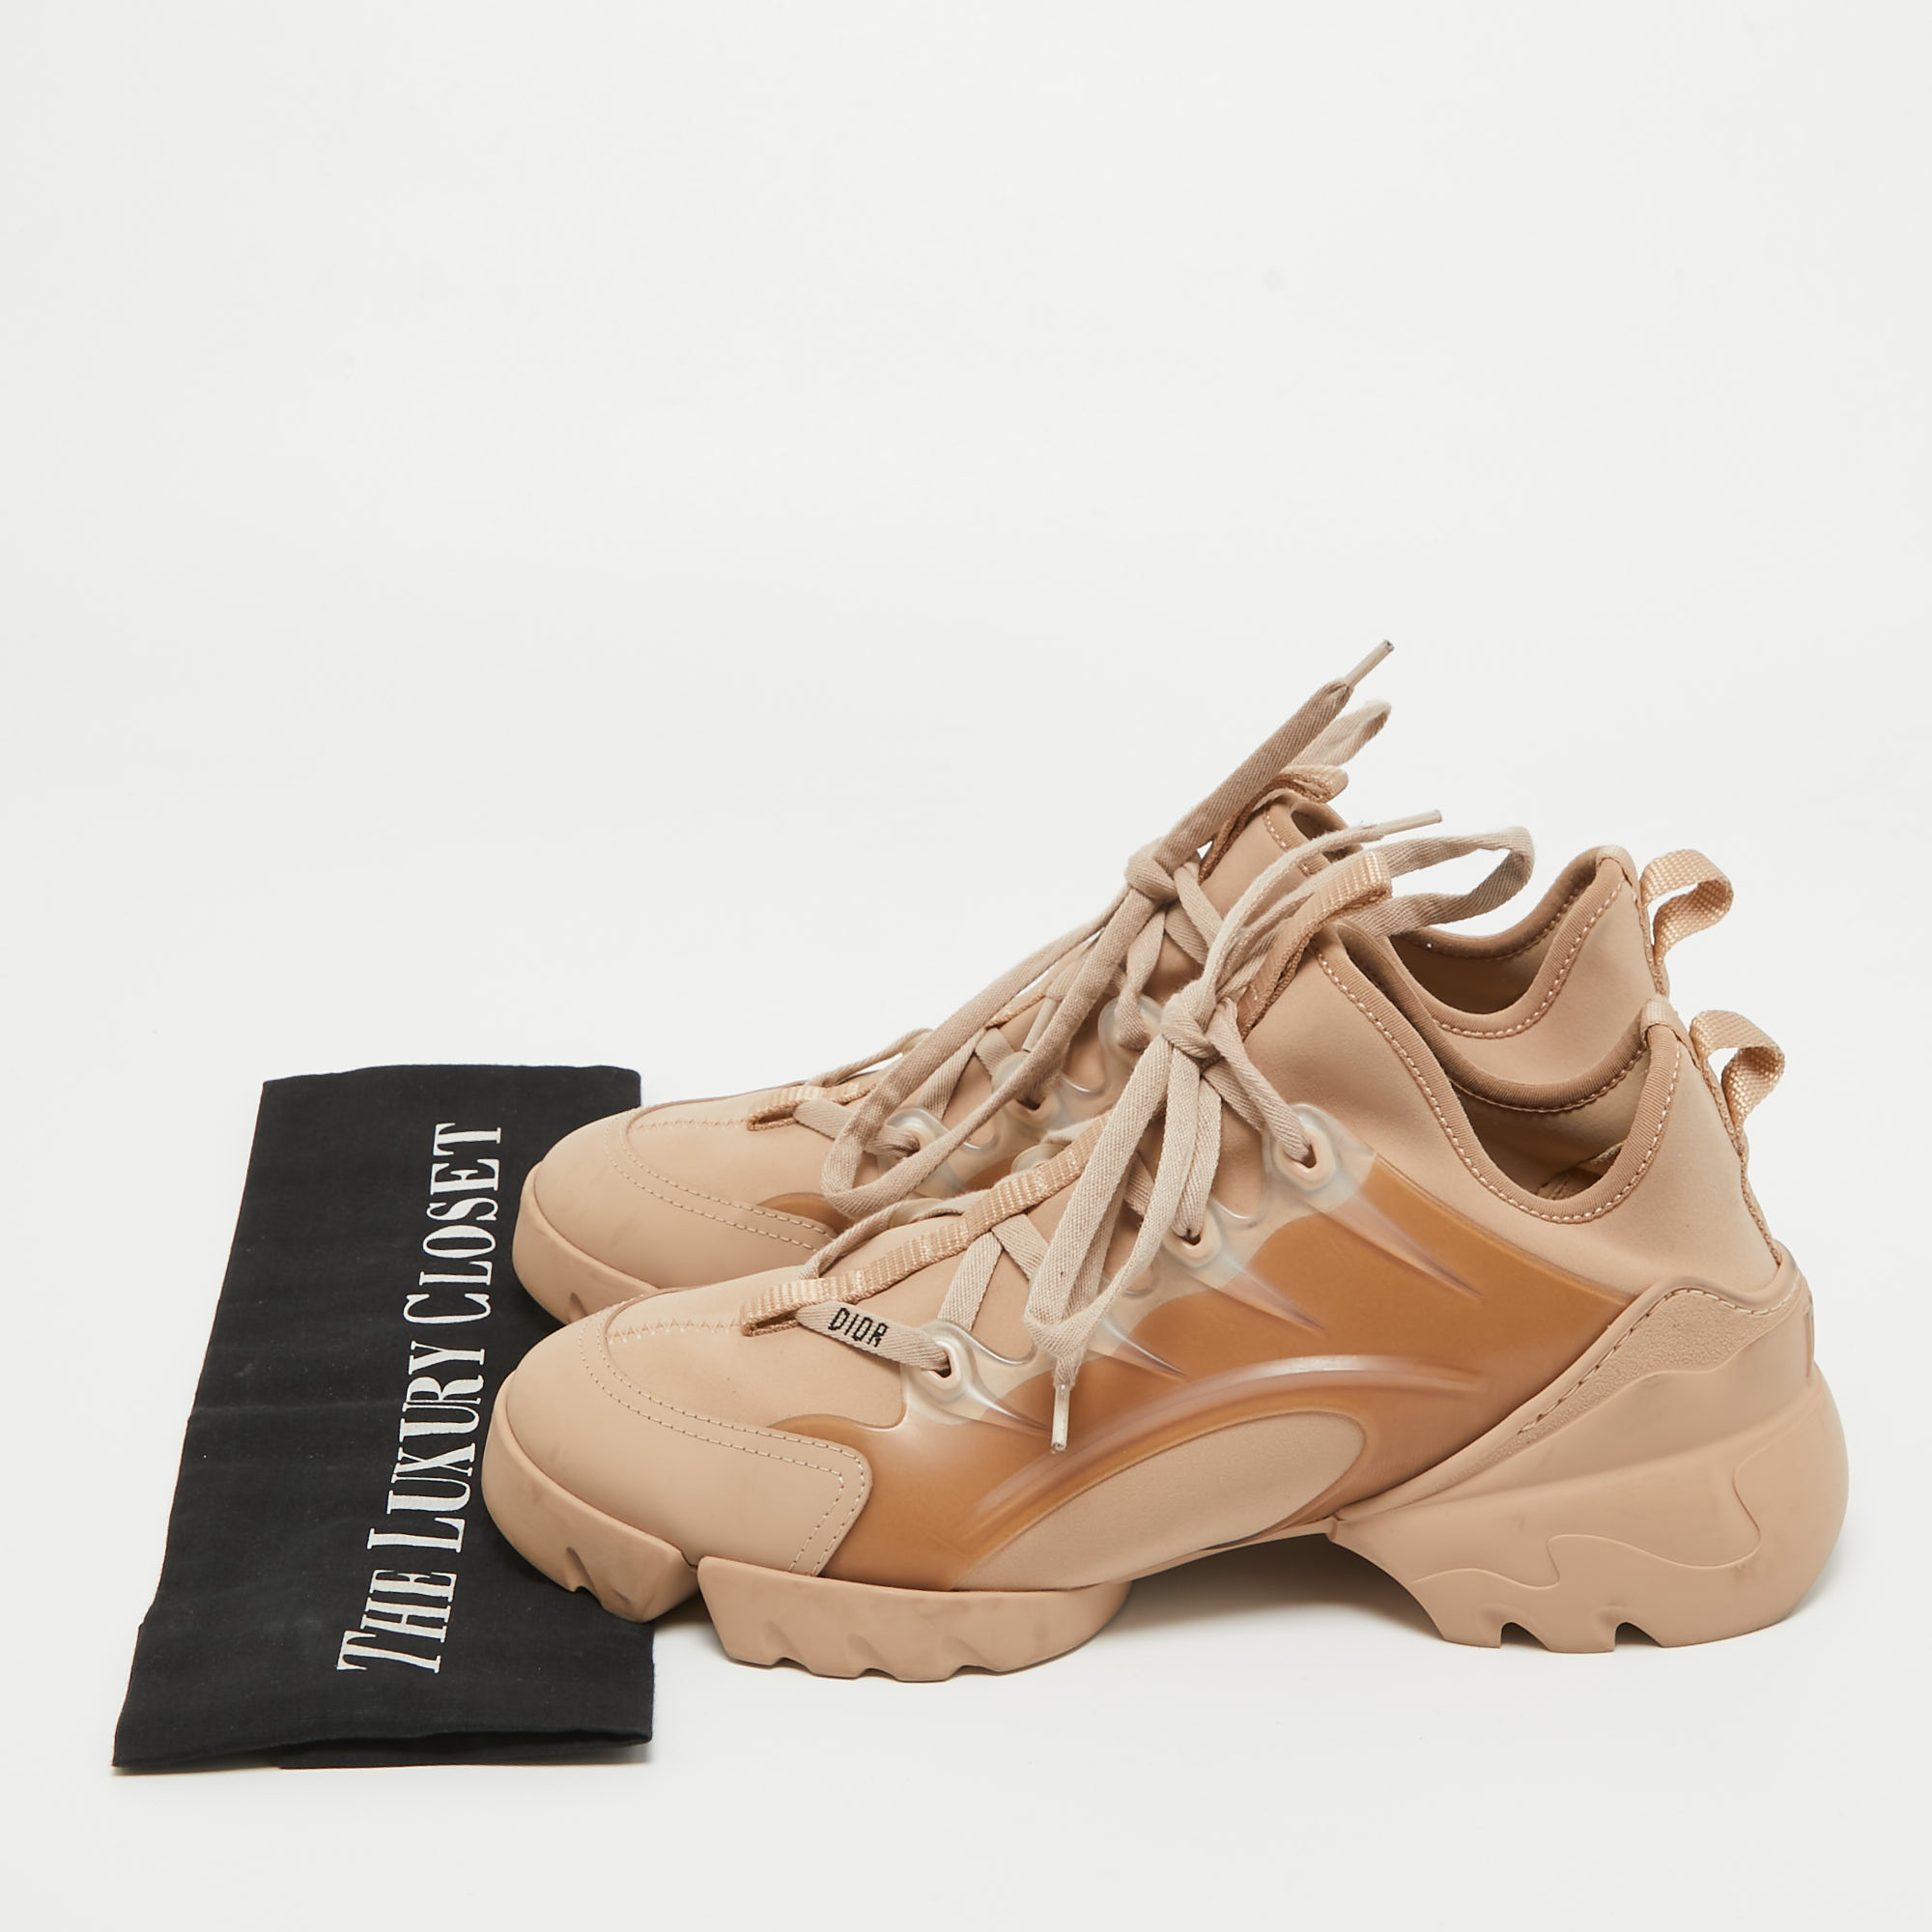 Dior Beige Neoprene And Rubber D-Connect Sneakers Size 39.5